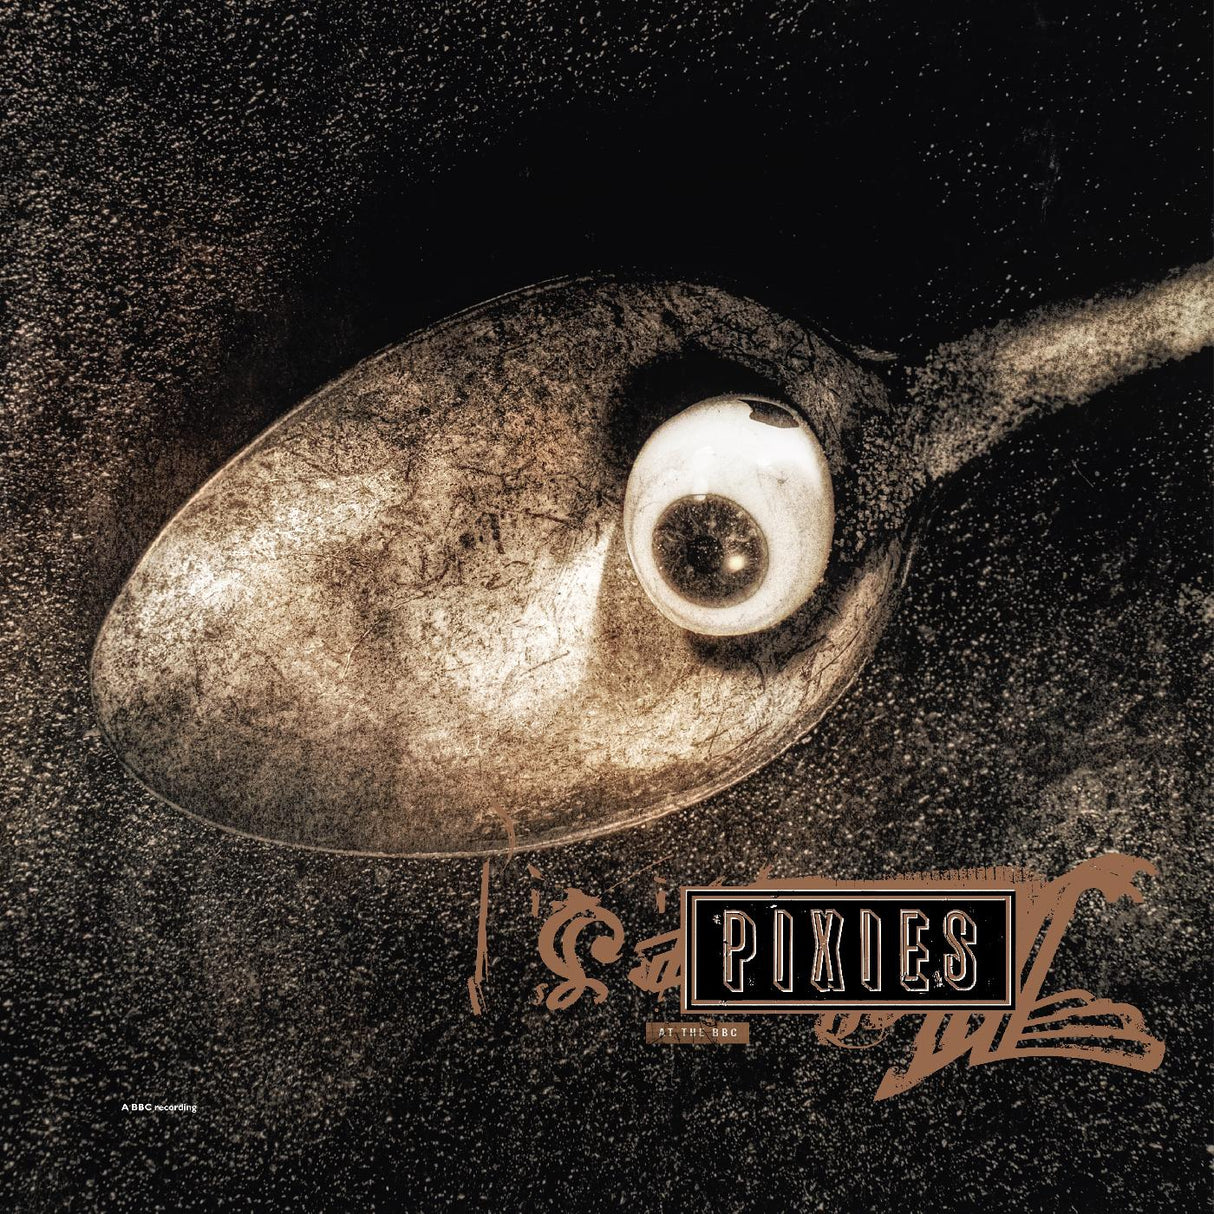 Pixies at the BBC [CD]